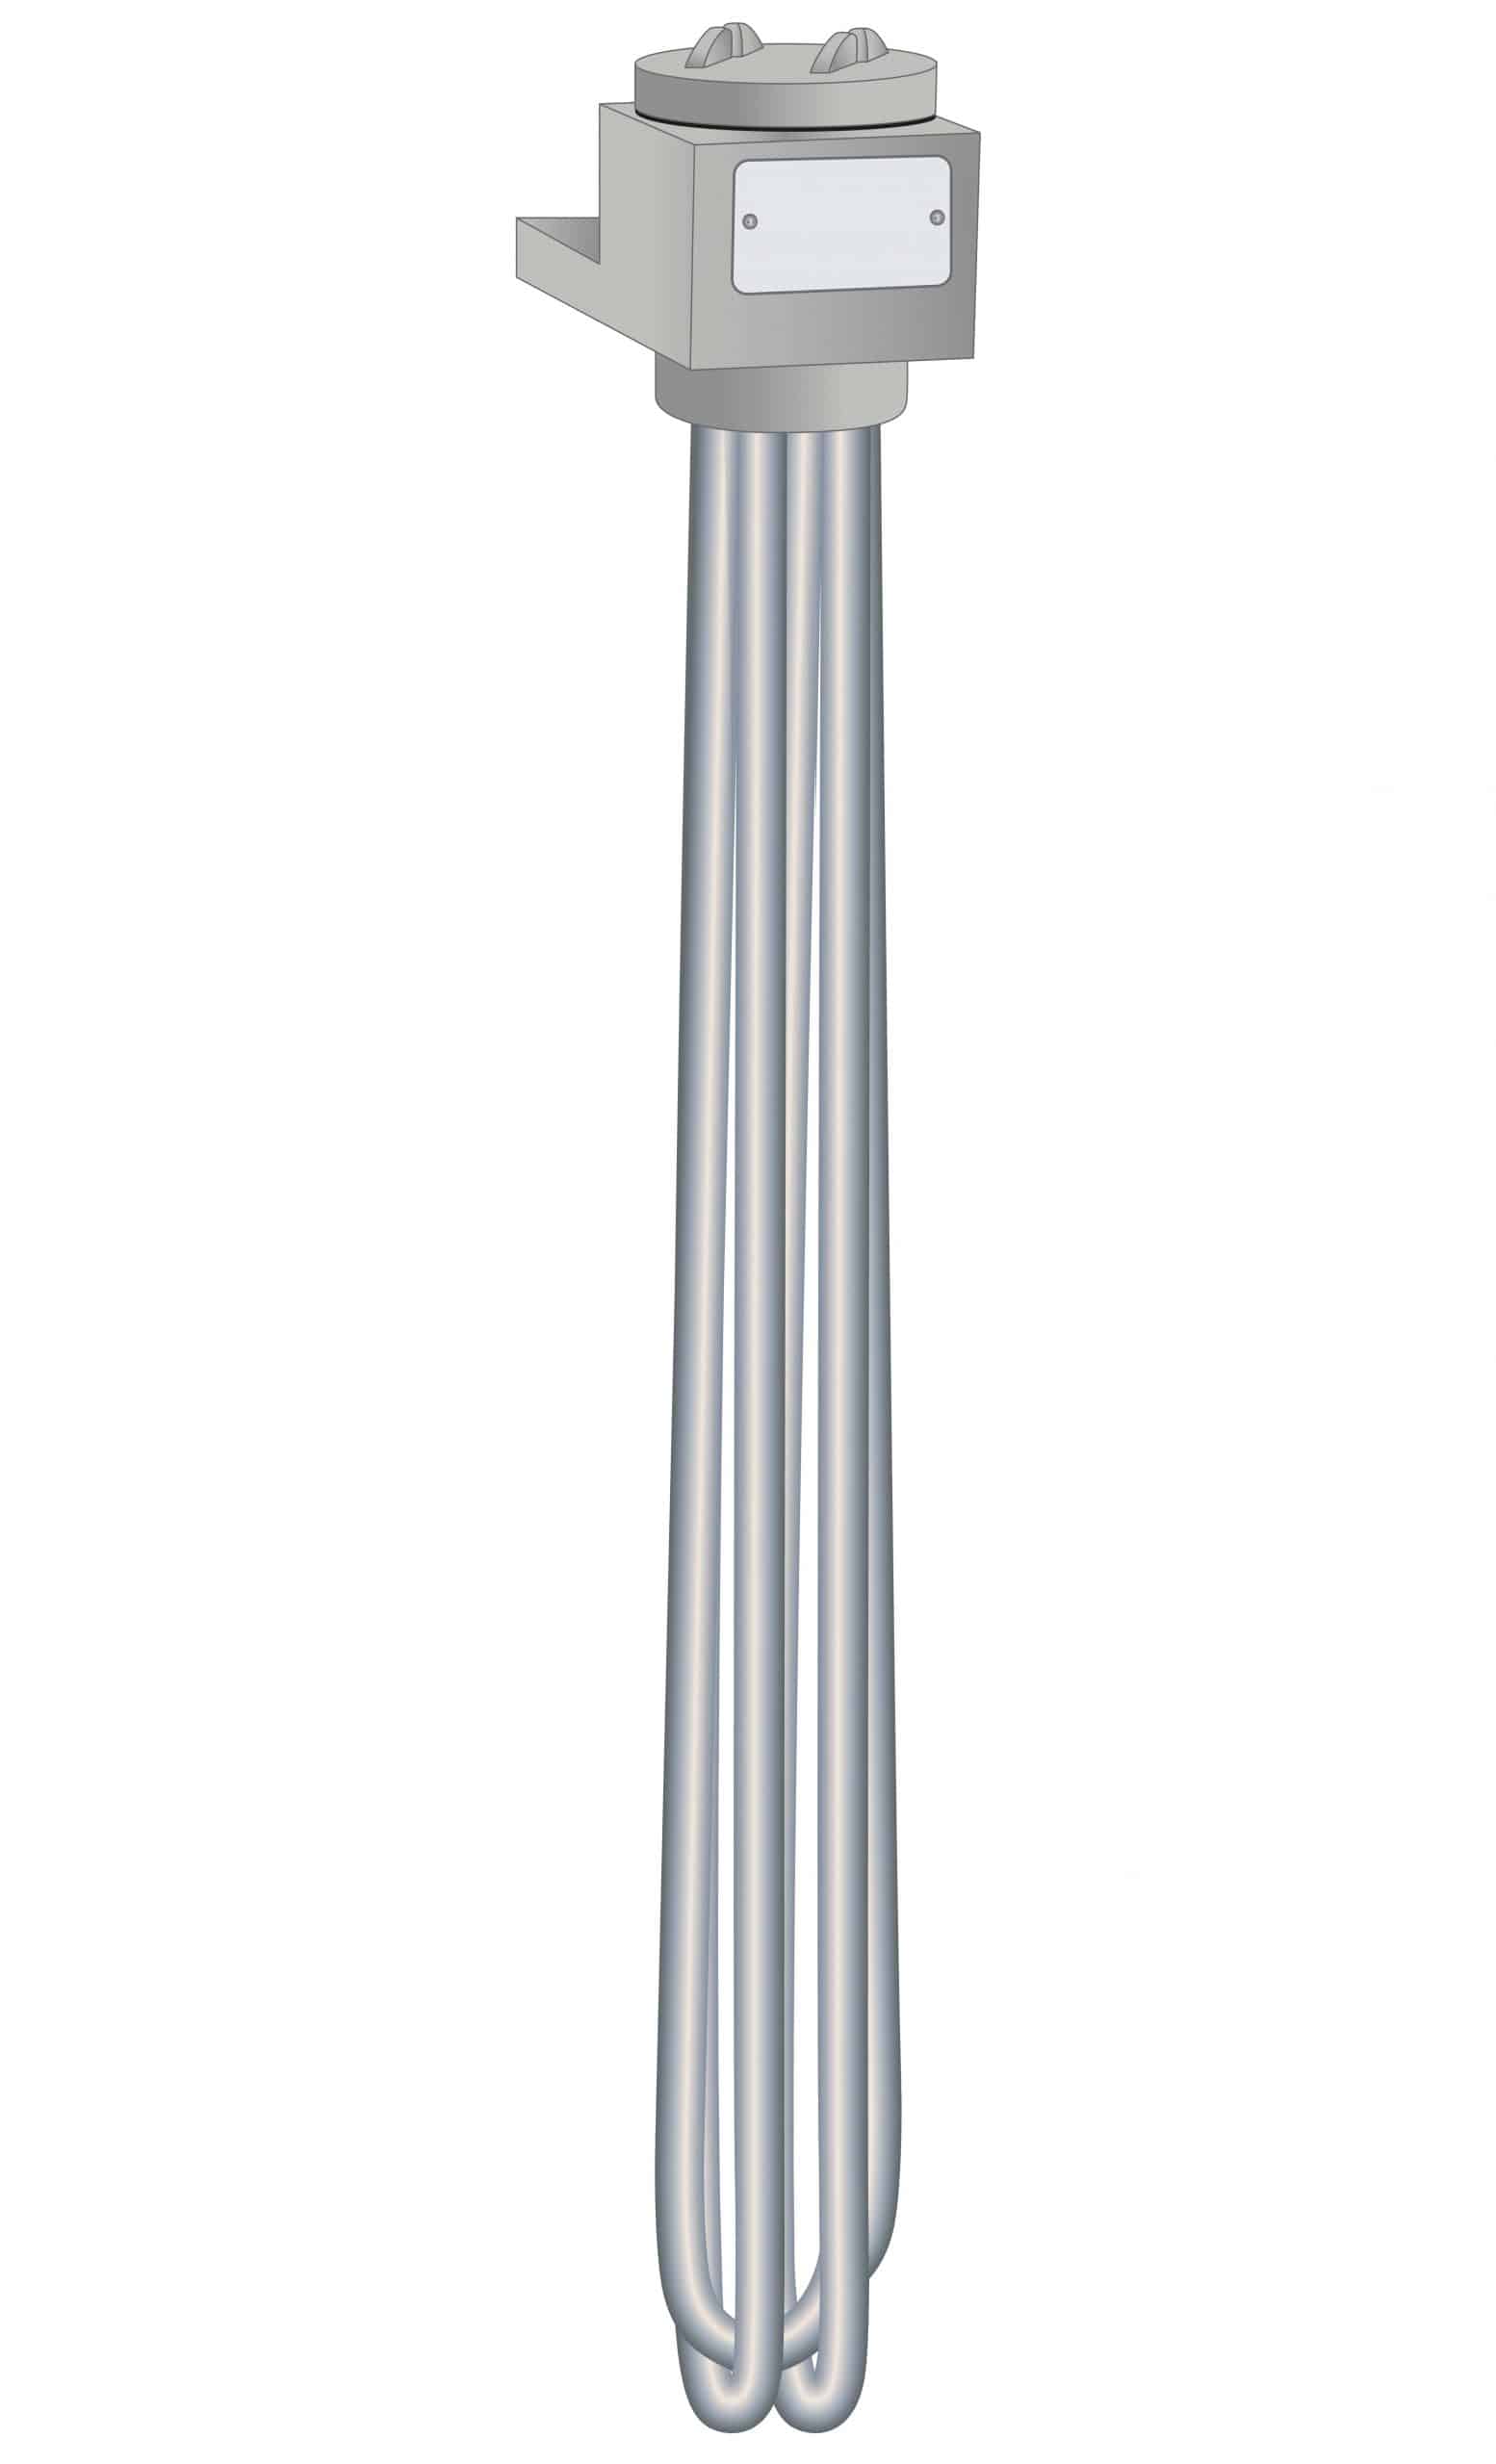 Watlow Square Flange Immersion Heater, Tubular Heaters